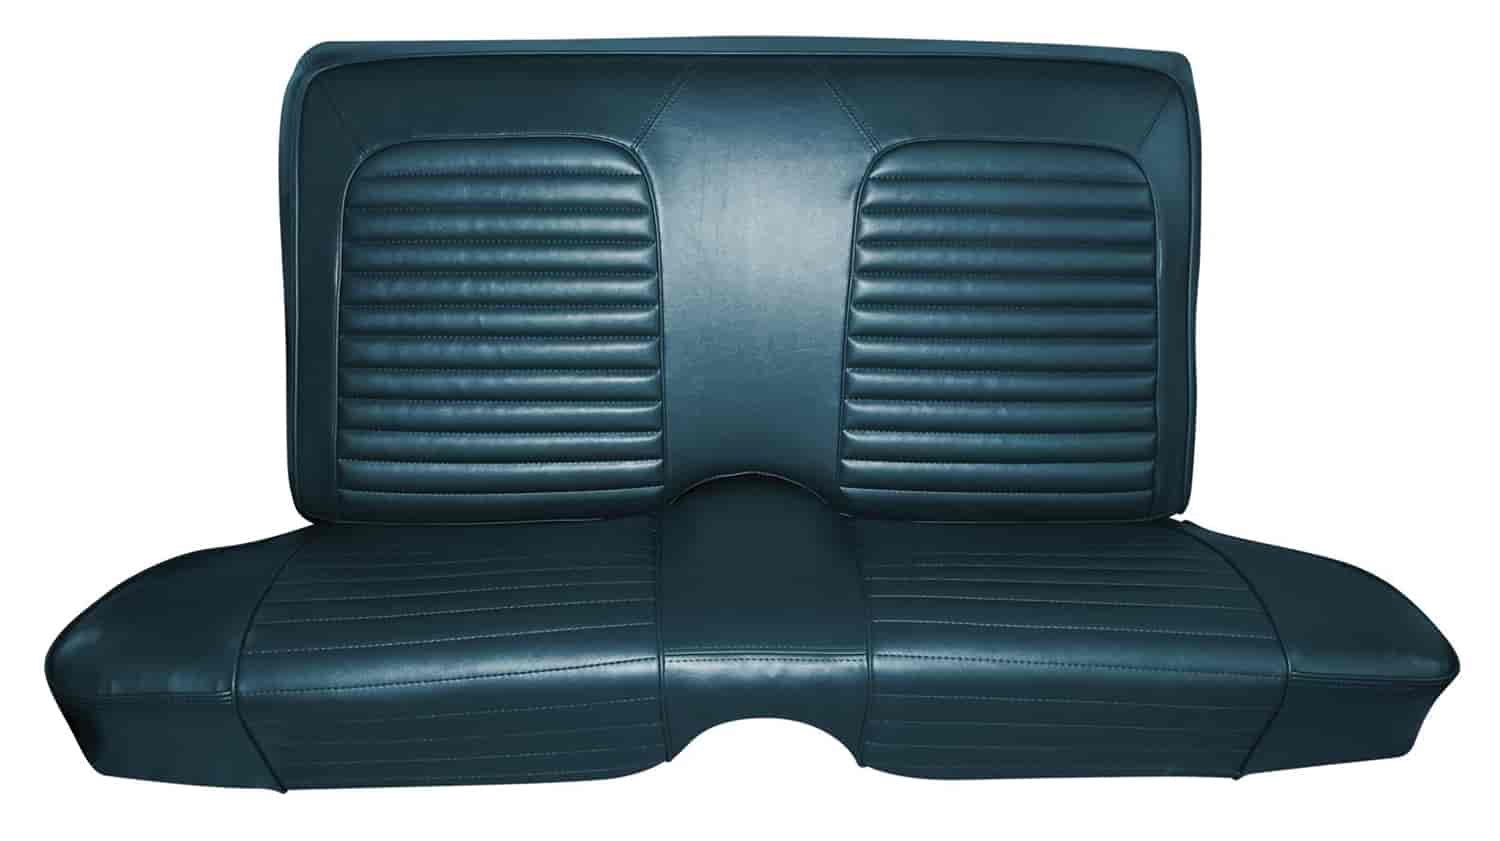 1963 Ford Falcon Futura 2-Door Station Wagon Interior Rear Bench Seat Upholstery for Vehicles with a Front Bench Seat